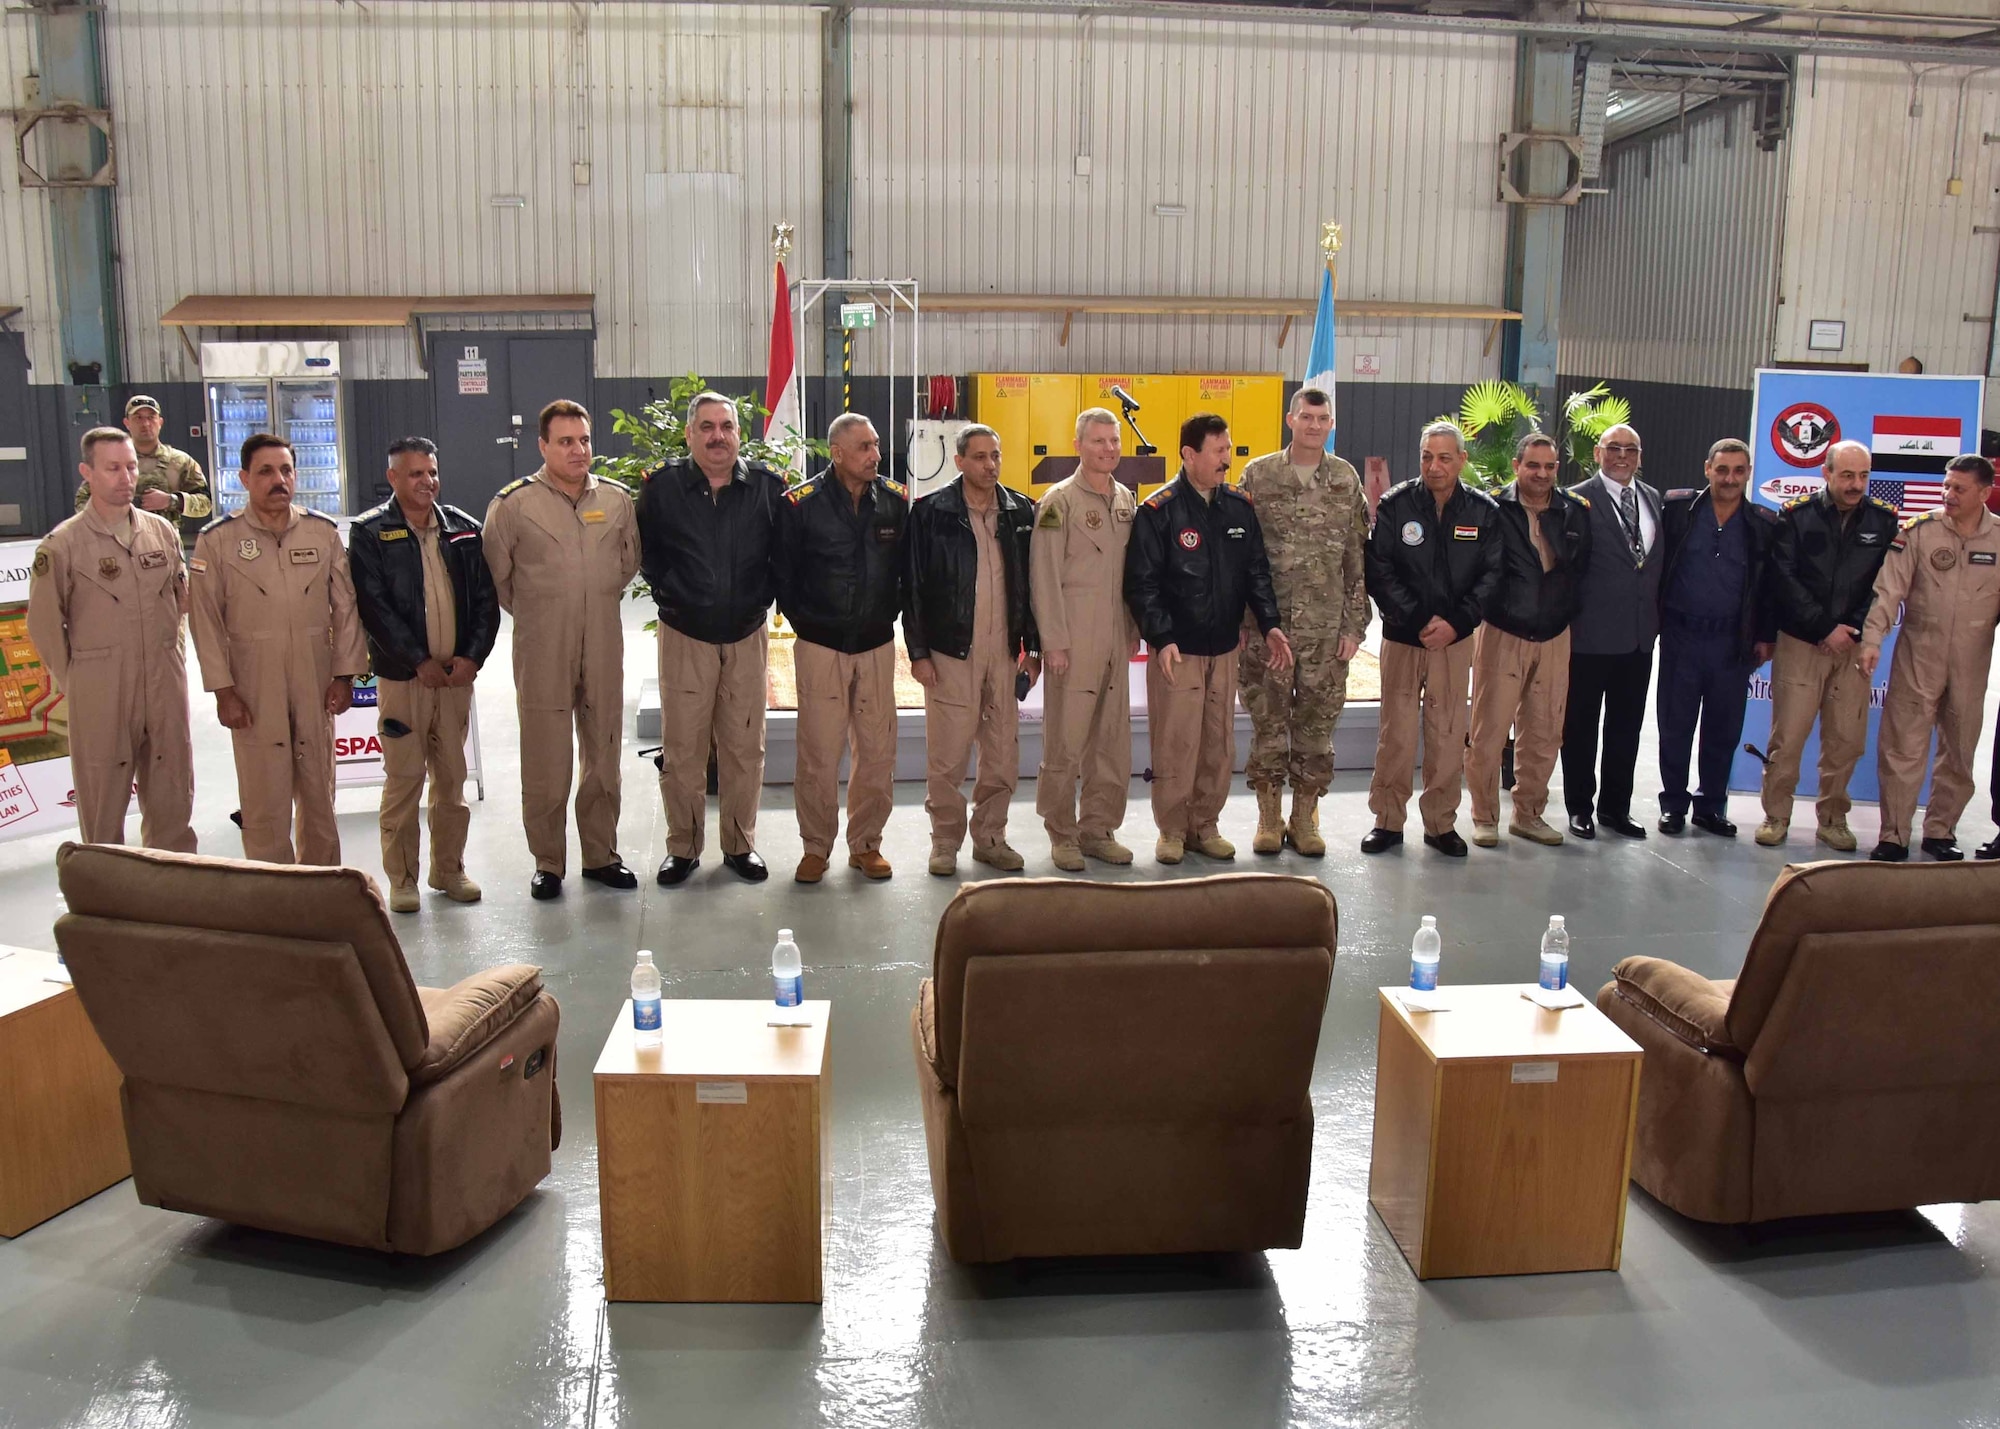 The Government of Iraq and the Coalition celebrate the reopening of the Iraqi Air Force Air Academy